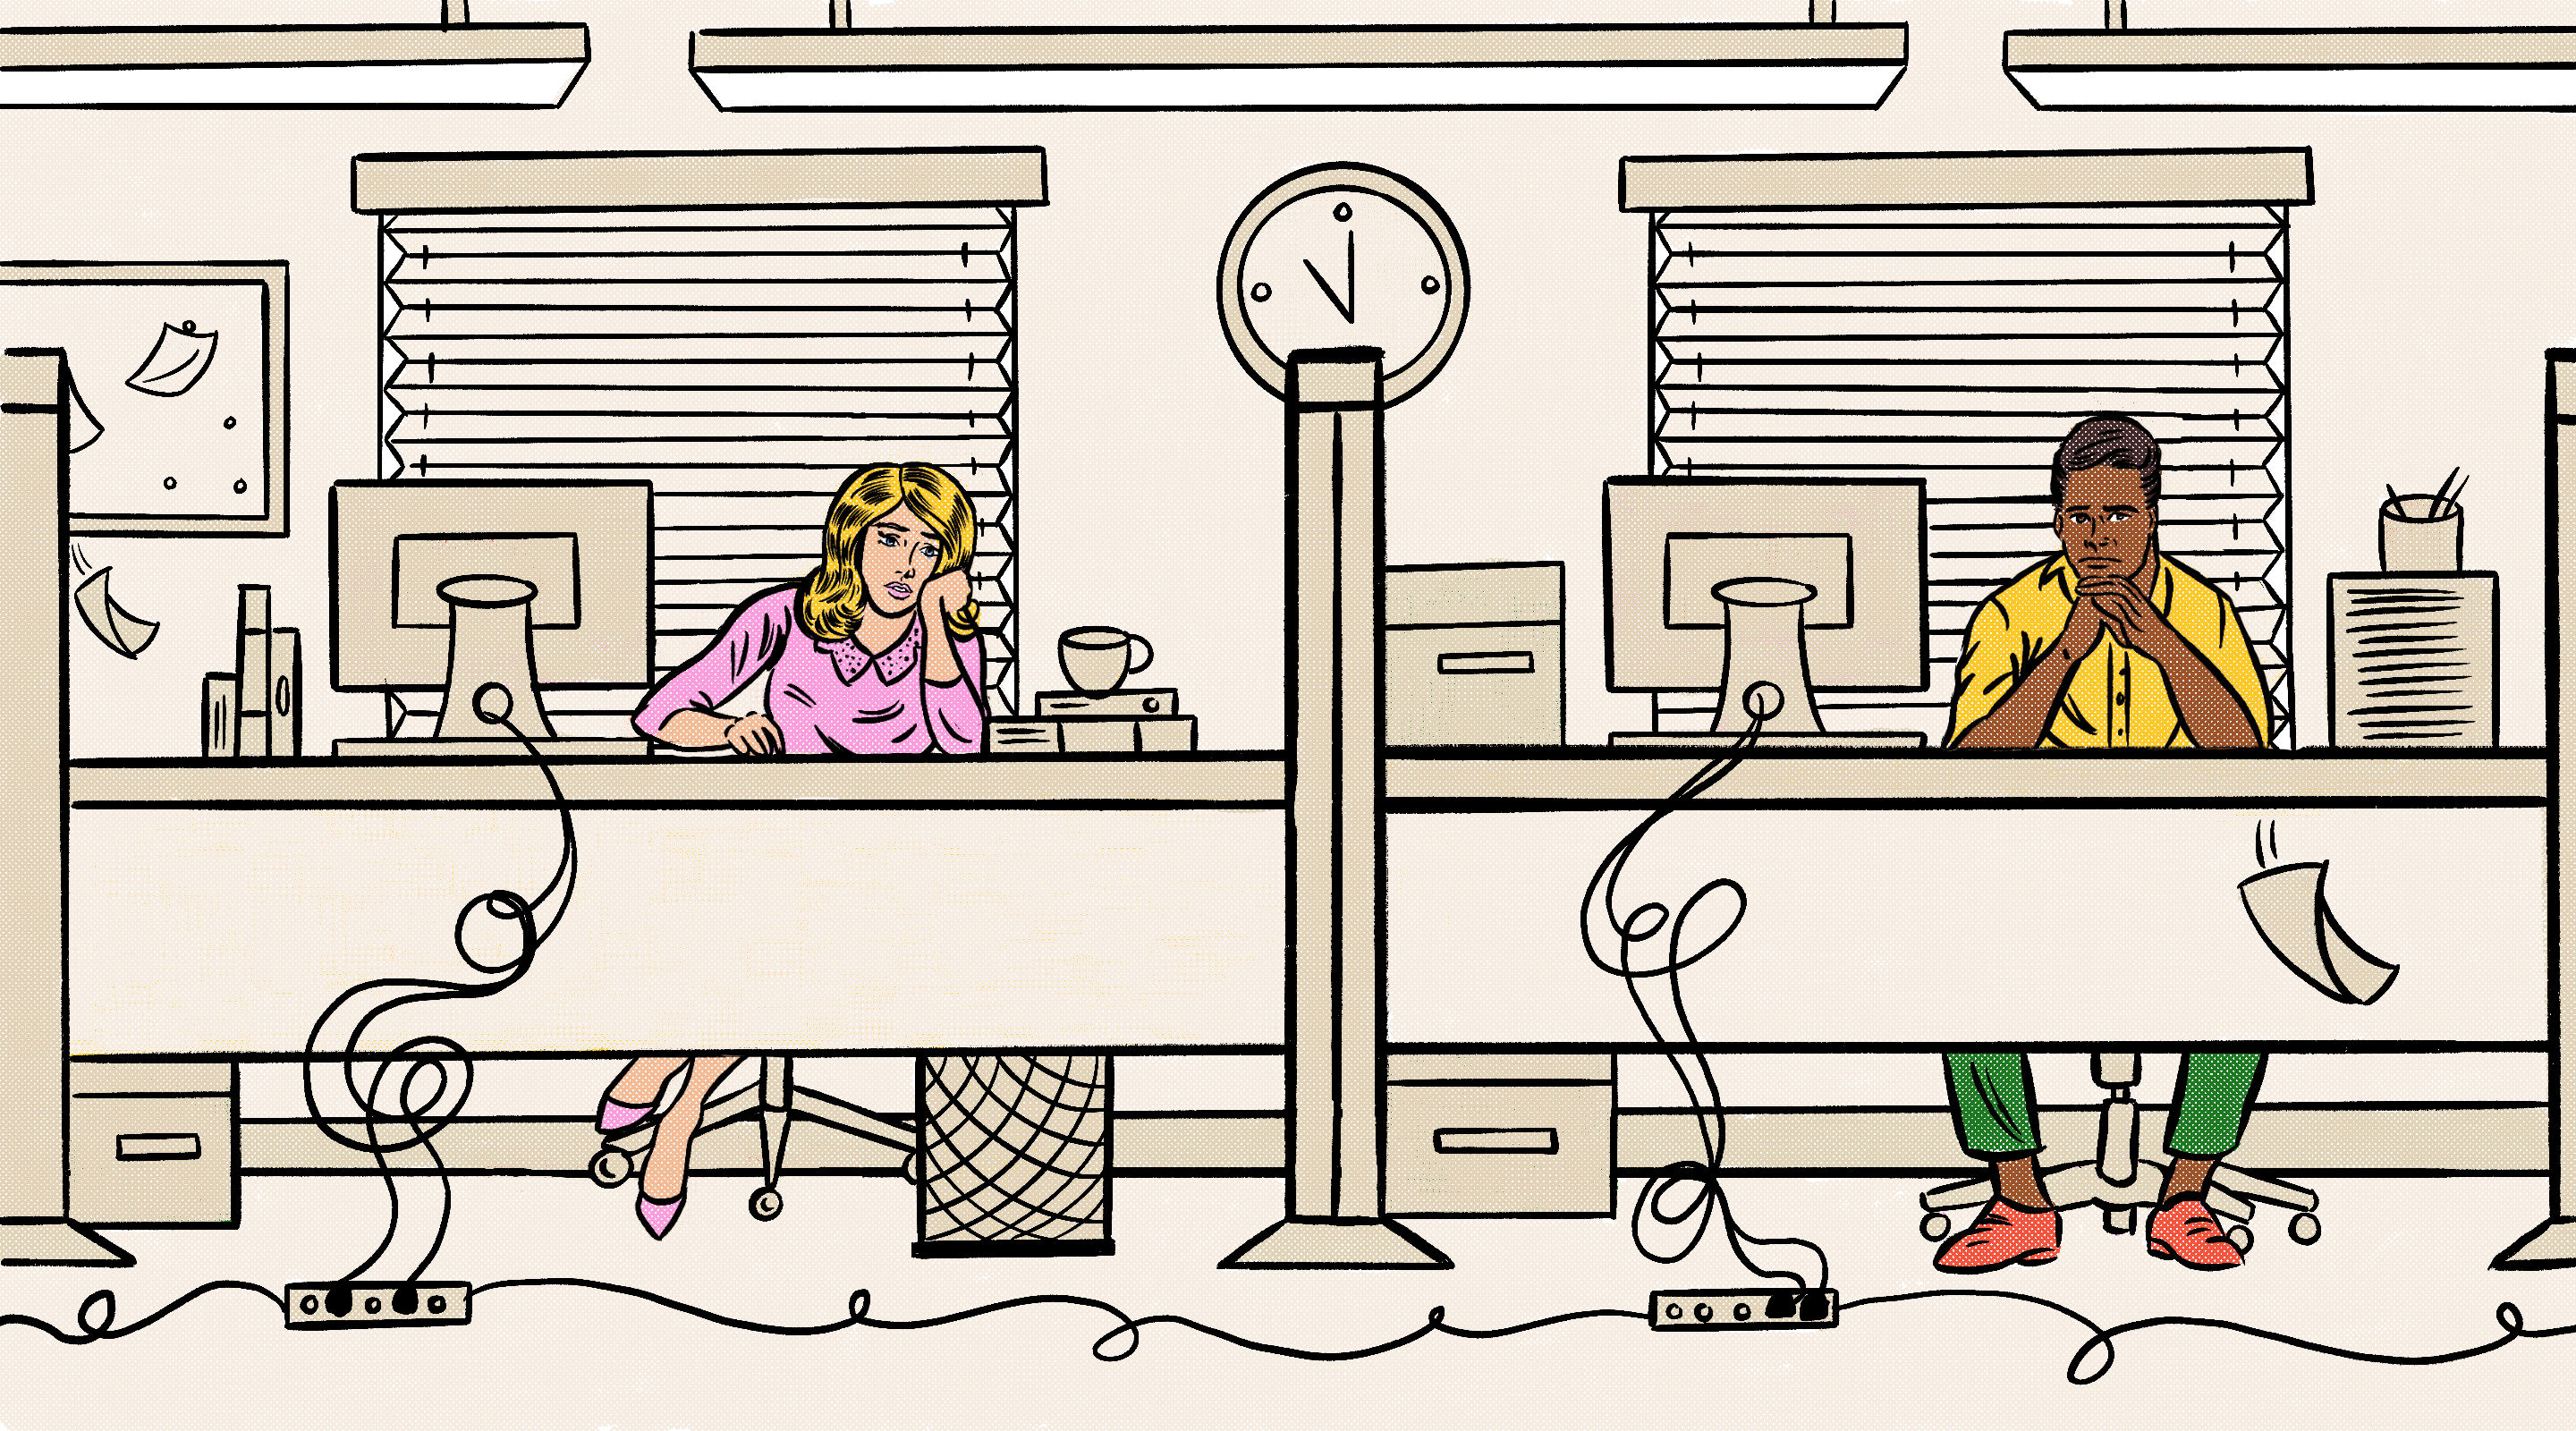 Drawing showing two people in an office setting